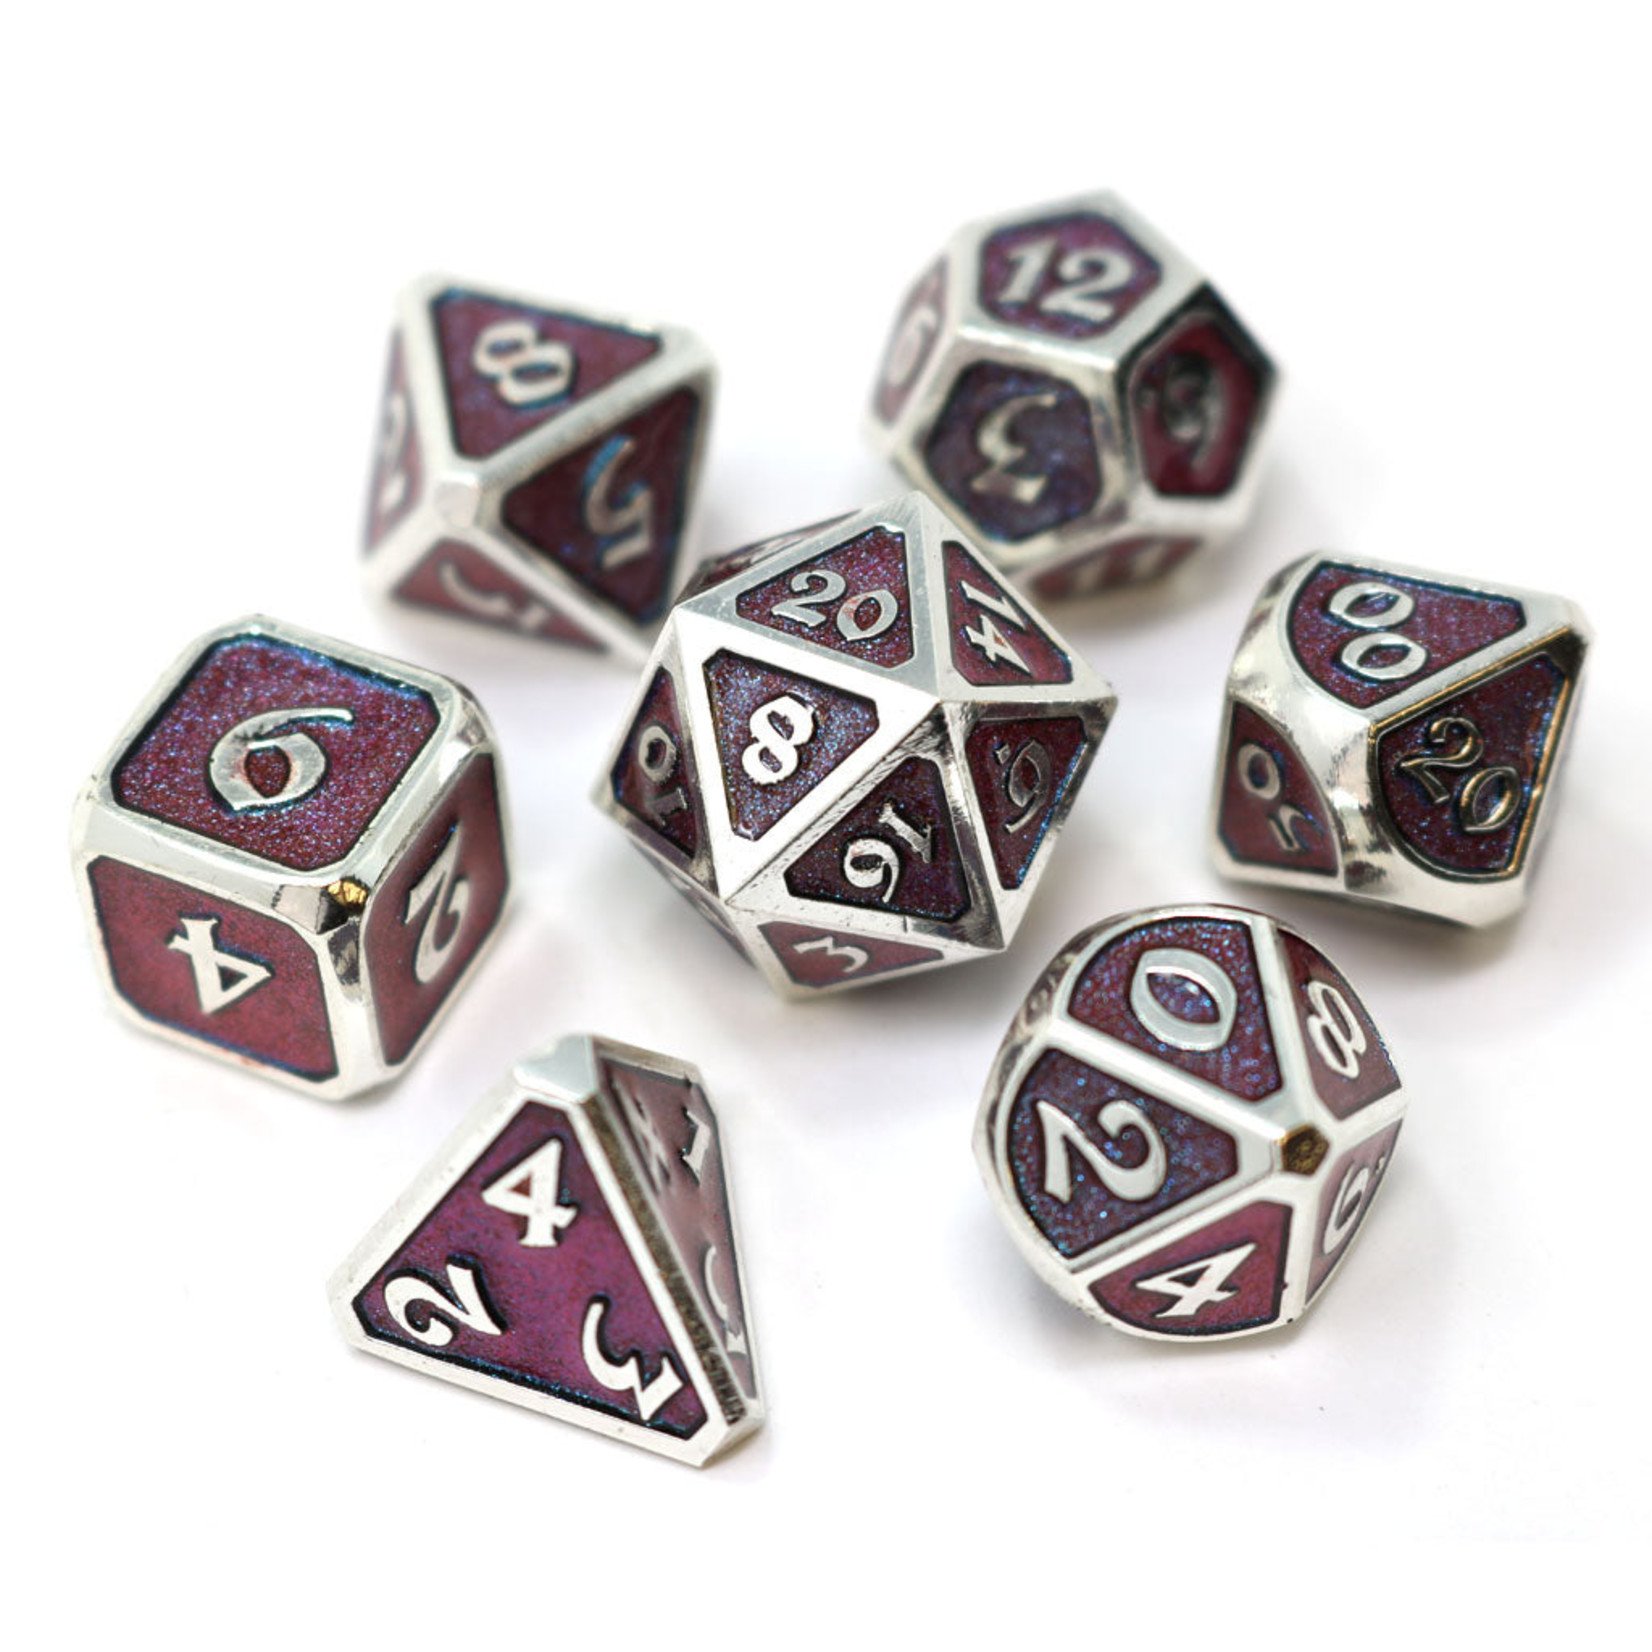 Die Hard Dice 7-Piece Dice Set: Mythica Dreamscape Tundra Melody